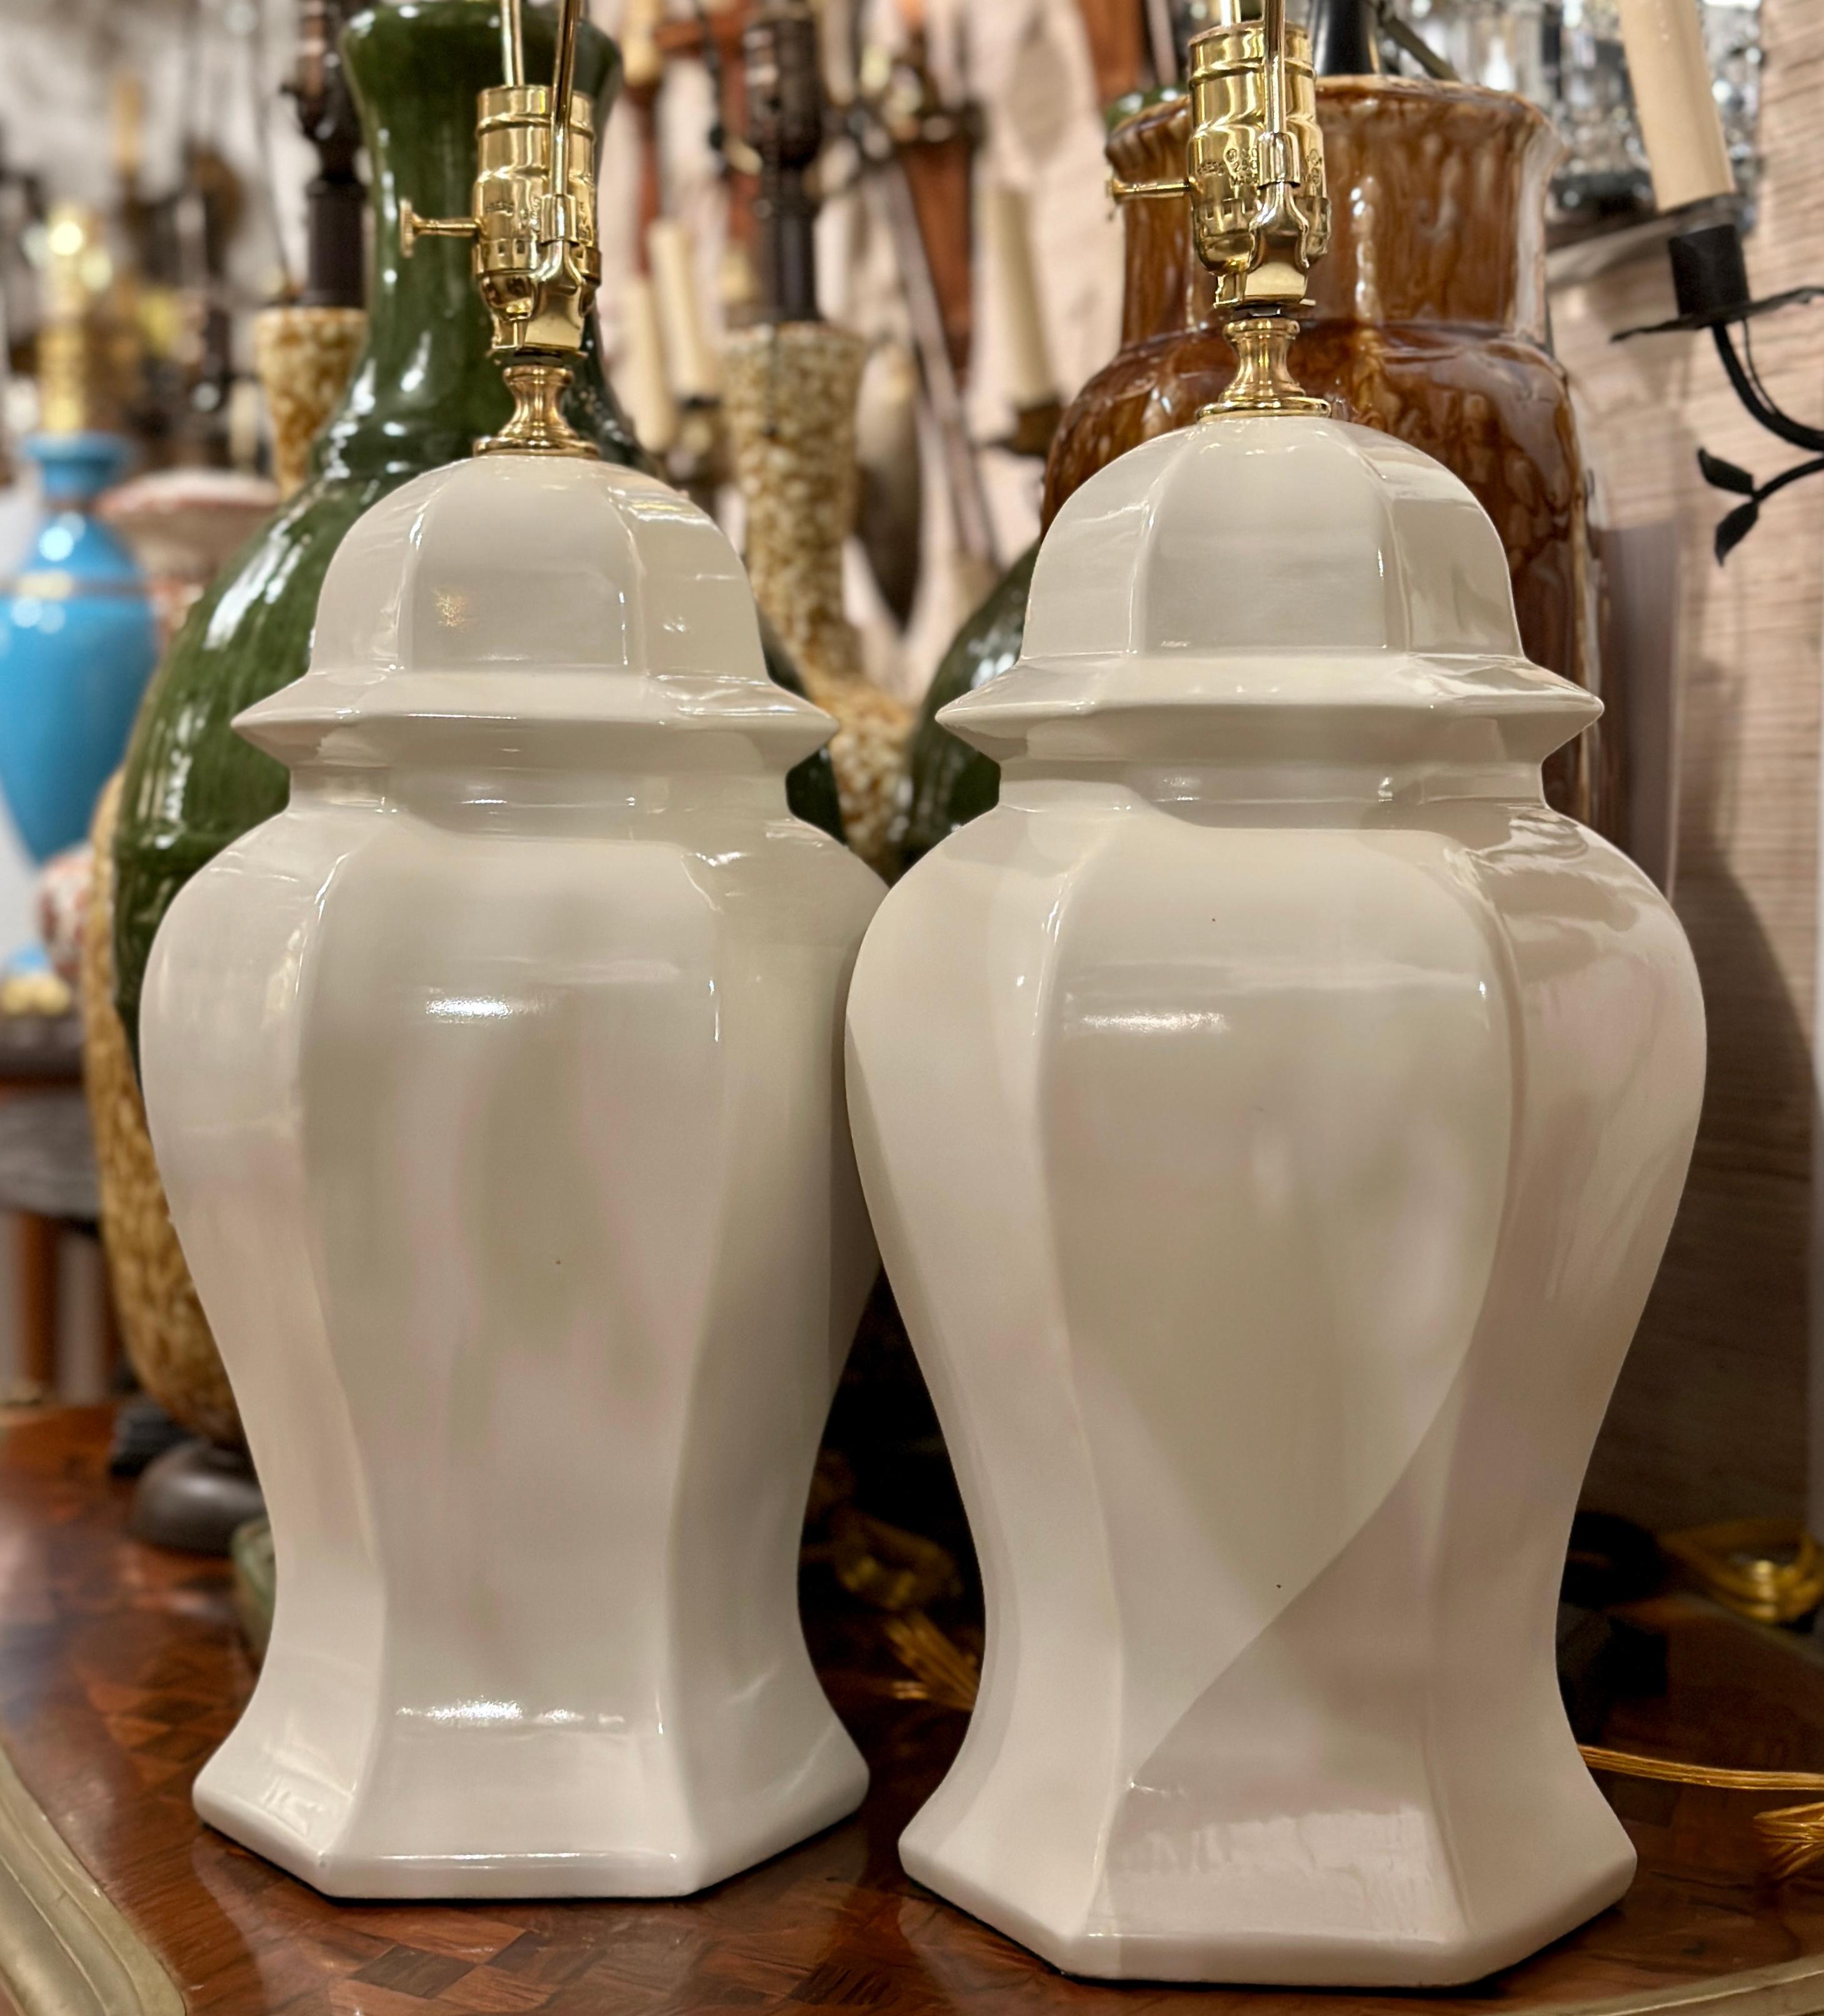 A pair of circa 1960s Italian white porcelain table lamps.

Measurements:
Height of body: 15